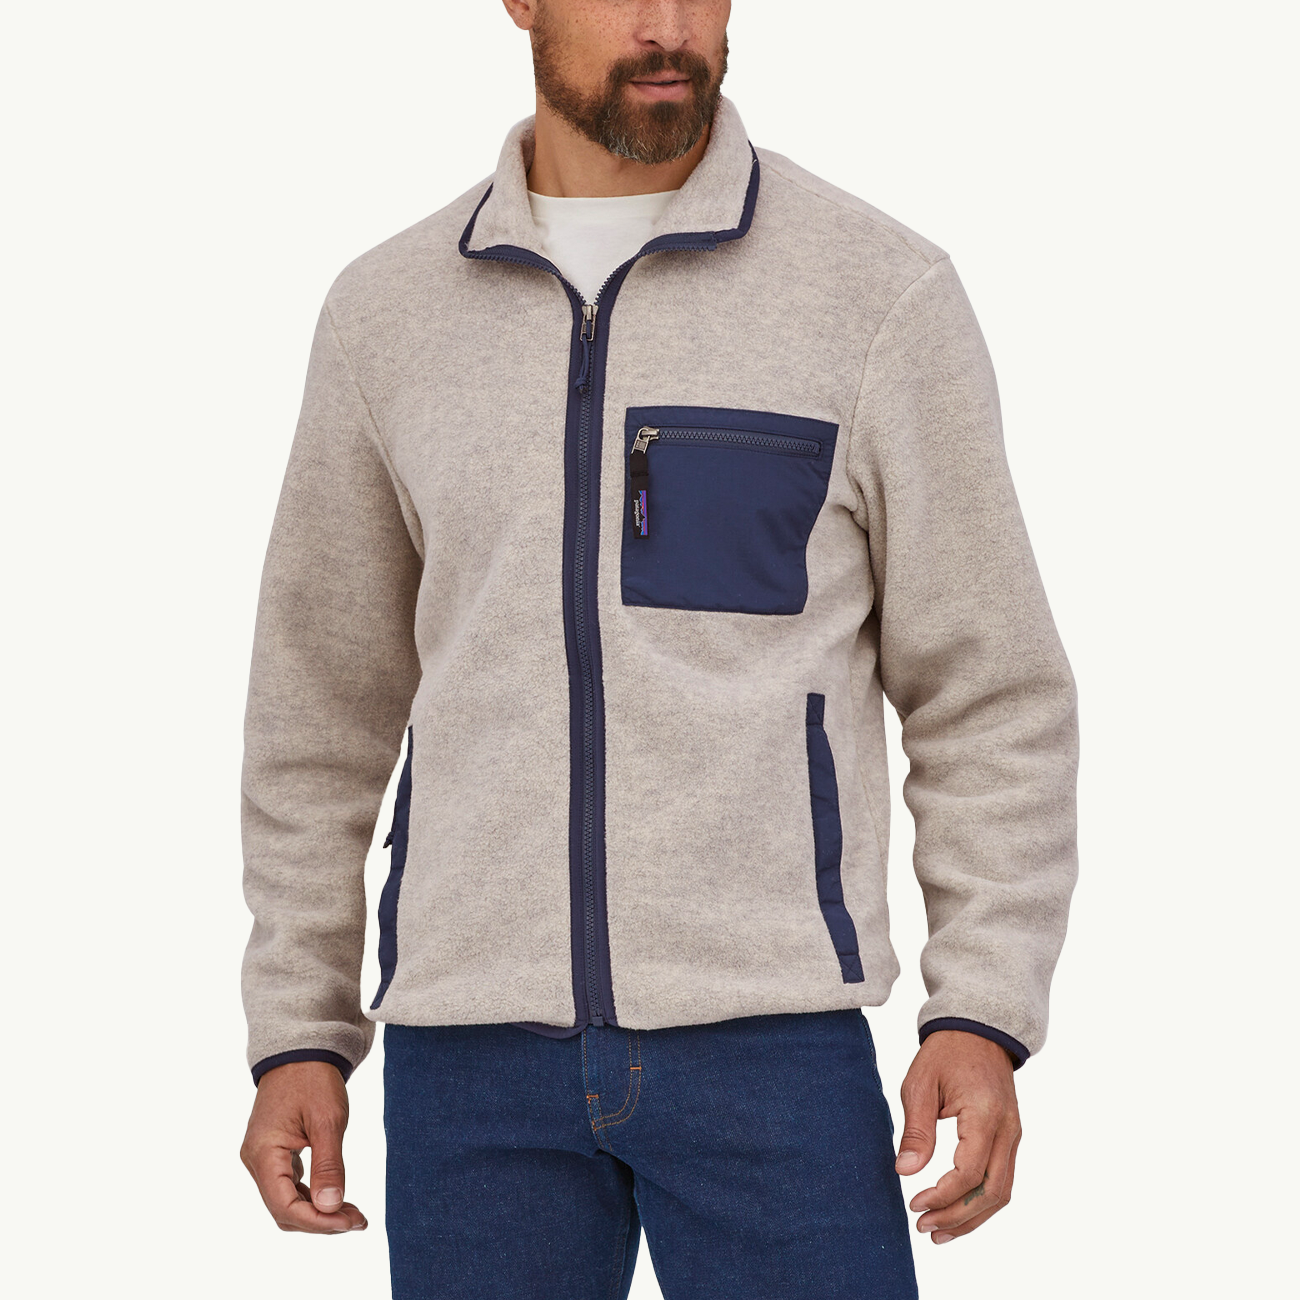 Synch Jacket - Oatmeal Heather